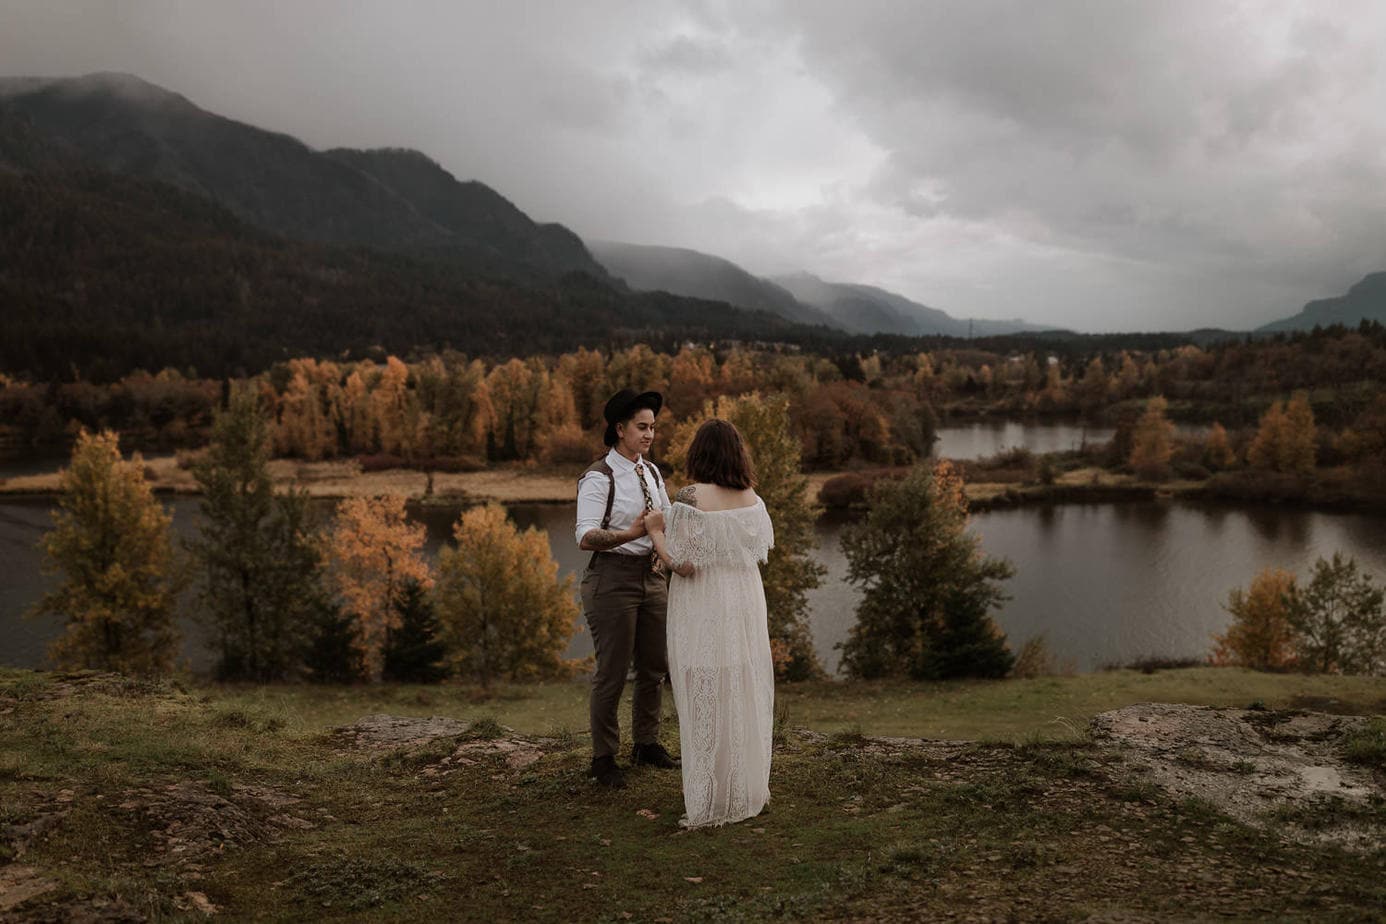 LGBTQ elopement in Oregon at the Columbia River gorge. The brides stand on the top of a cliff overlooking the river and the trees below. The trees are turning yellow from the fall season. The brides look at each other